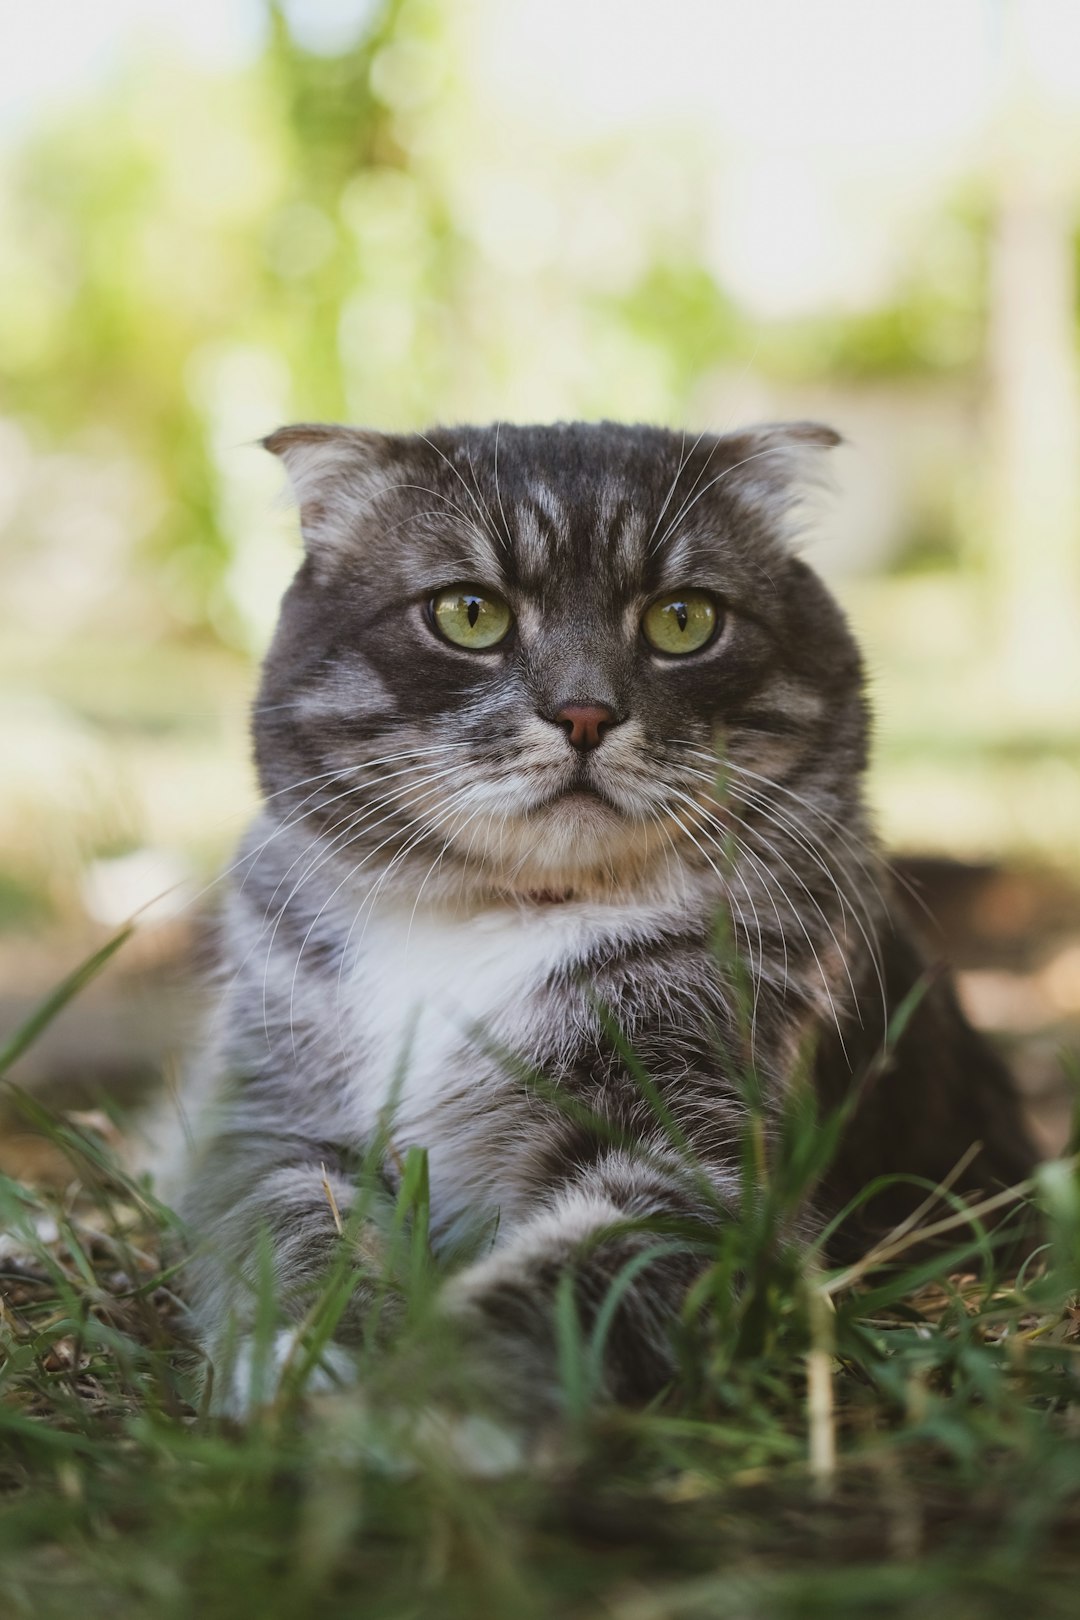 grey and white cat on green grass during daytime